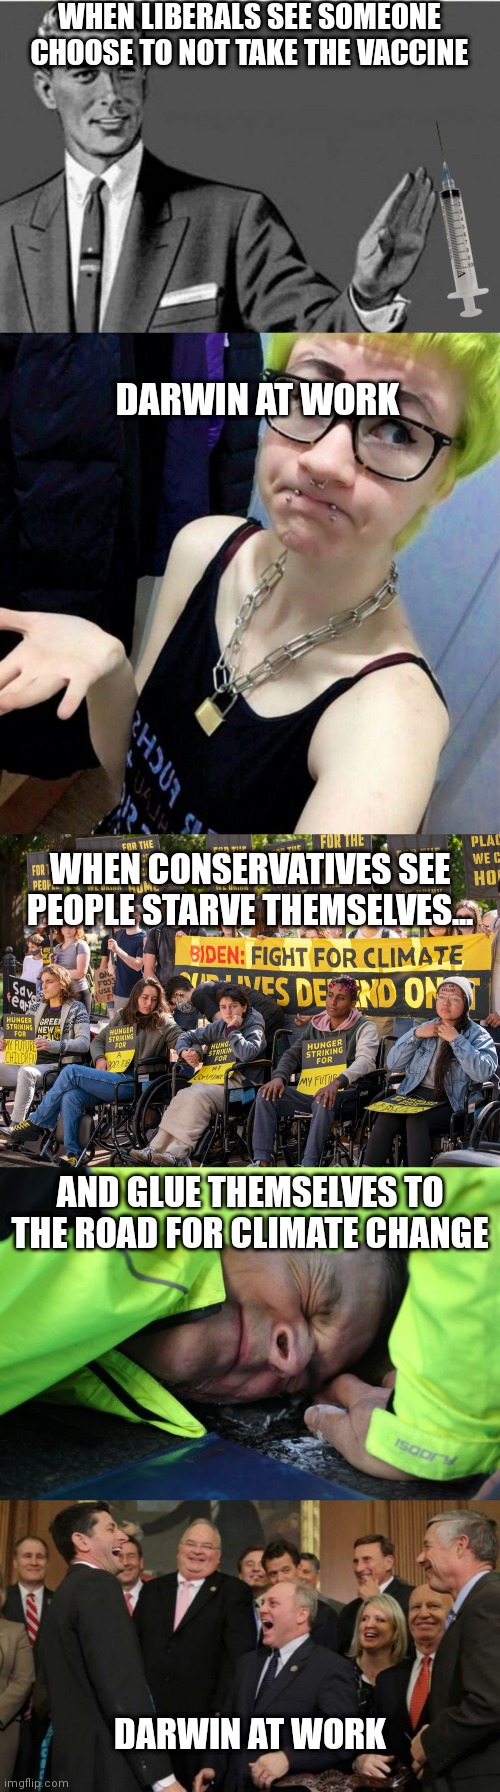 Just painting a picture. | WHEN LIBERALS SEE SOMEONE CHOOSE TO NOT TAKE THE VACCINE; DARWIN AT WORK; WHEN CONSERVATIVES SEE PEOPLE STARVE THEMSELVES... AND GLUE THEMSELVES TO THE ROAD FOR CLIMATE CHANGE; DARWIN AT WORK | image tagged in no thanks,clueless liberal,republicans senators laughing,climate change,liberals,democrats | made w/ Imgflip meme maker